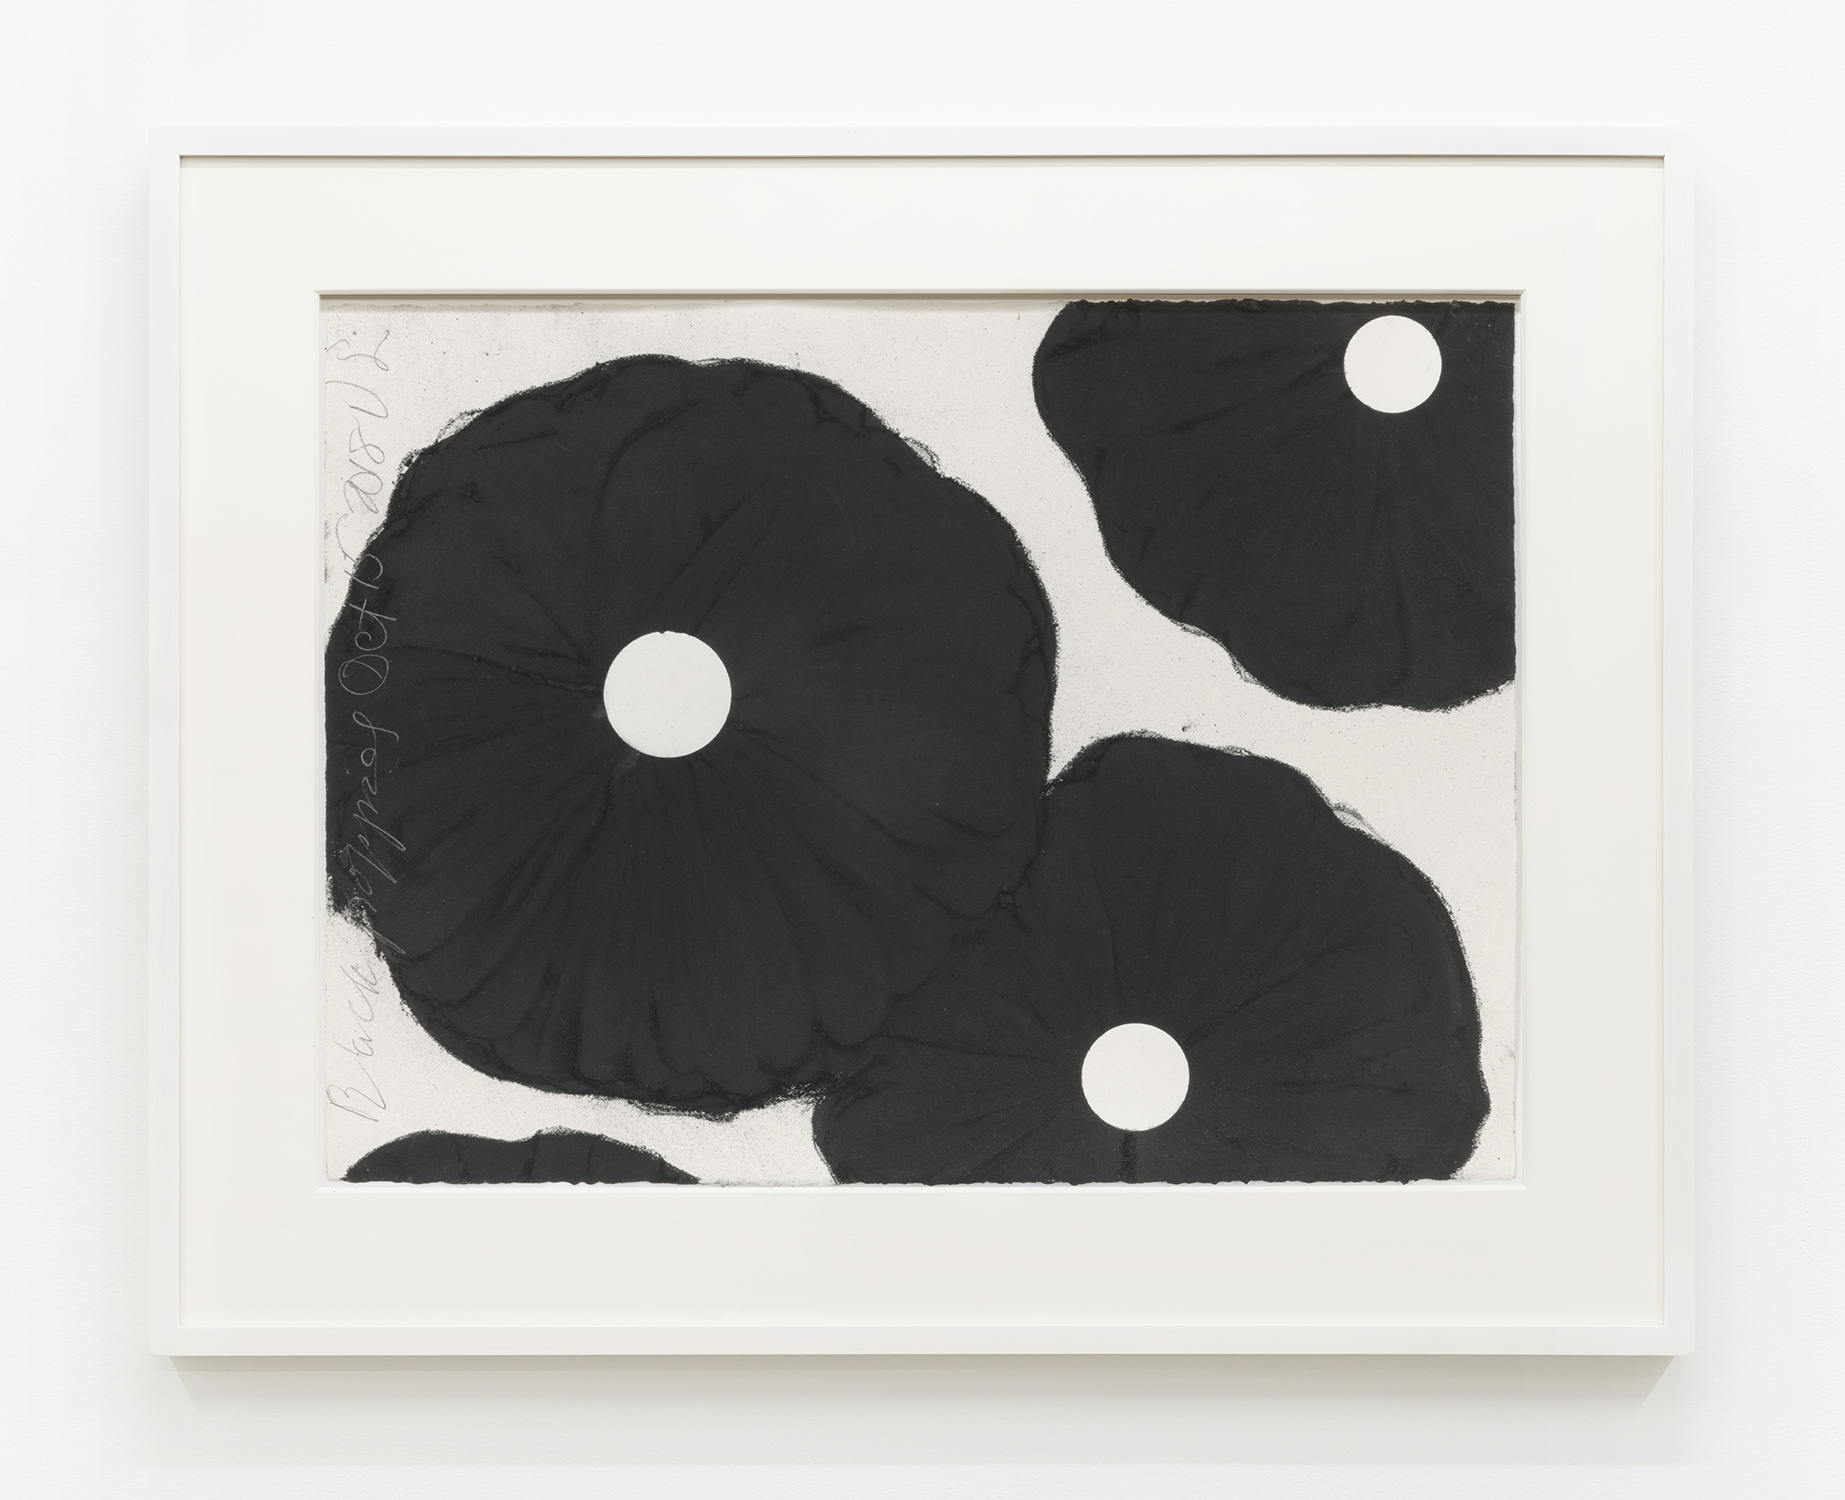 Donald Sultan Black Poppies Oct 15 2018, 2018 Conte crayon on paper 22 1/2 x 30 1/8 inches (57.2 x 76.5 cm)